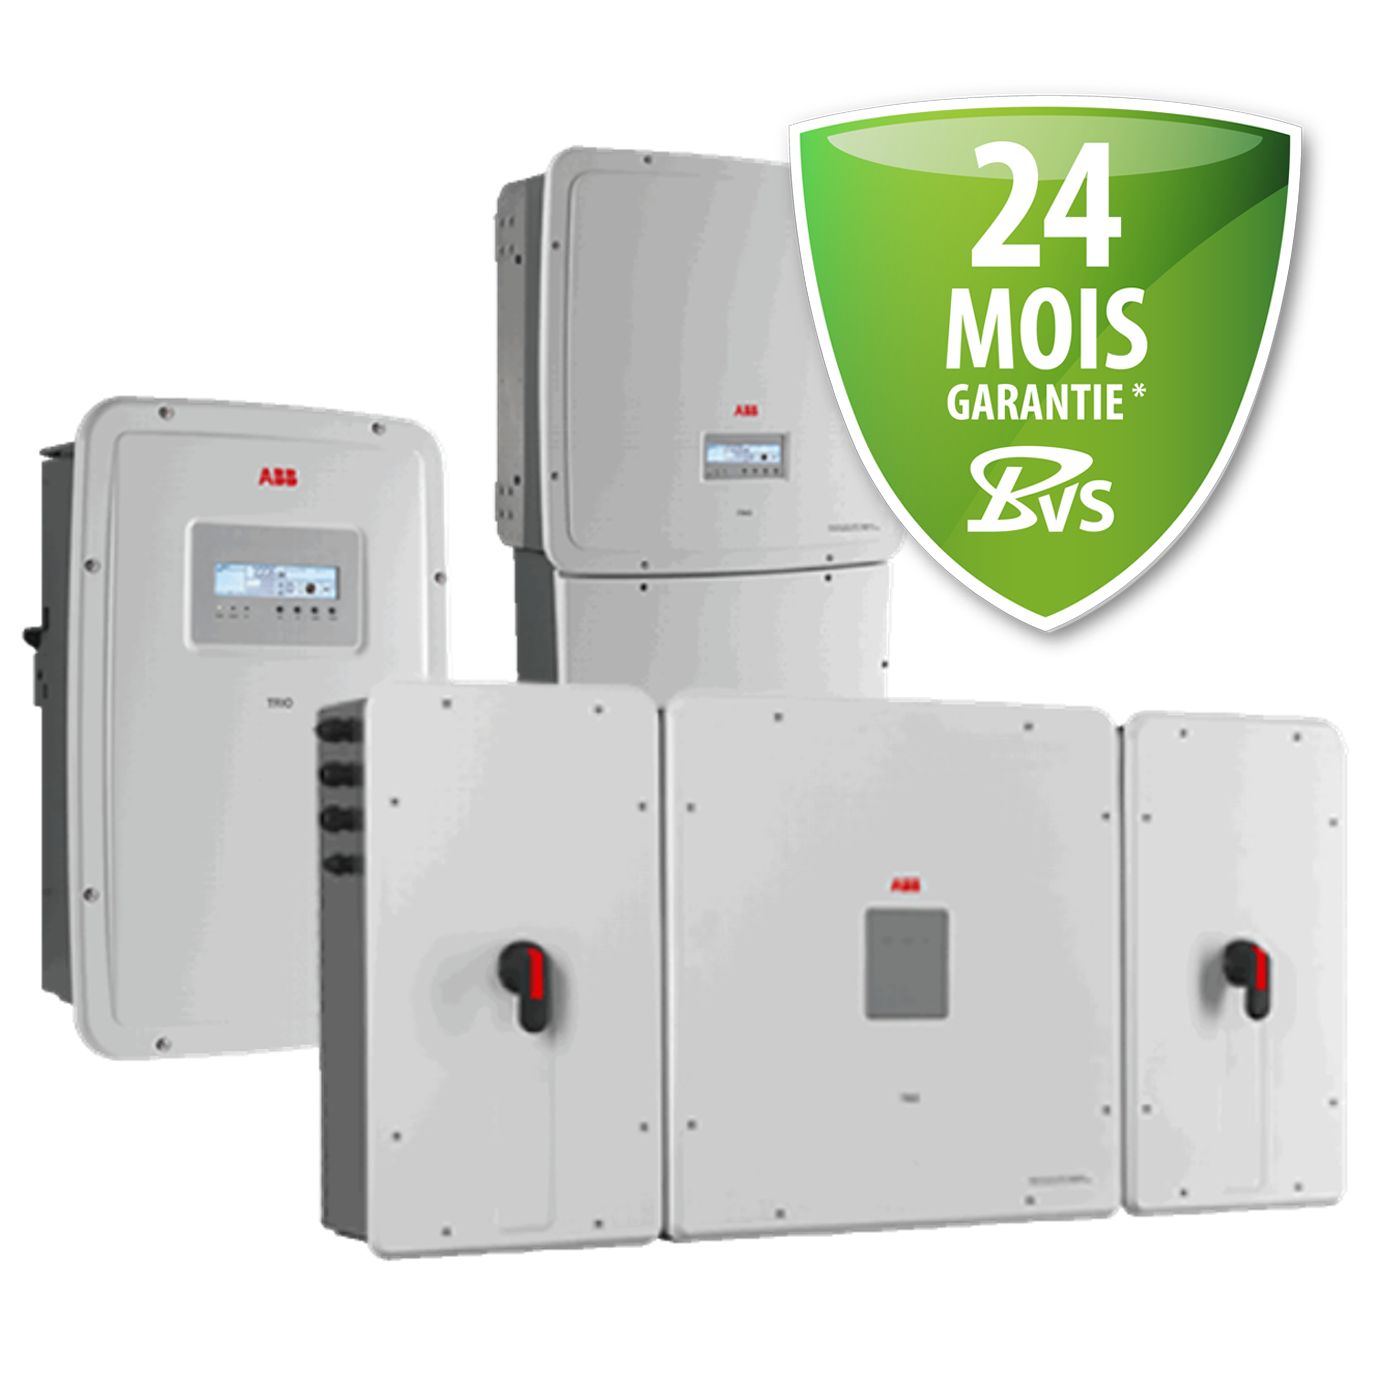 ABB TRIO repair and service with a 24 months warranty